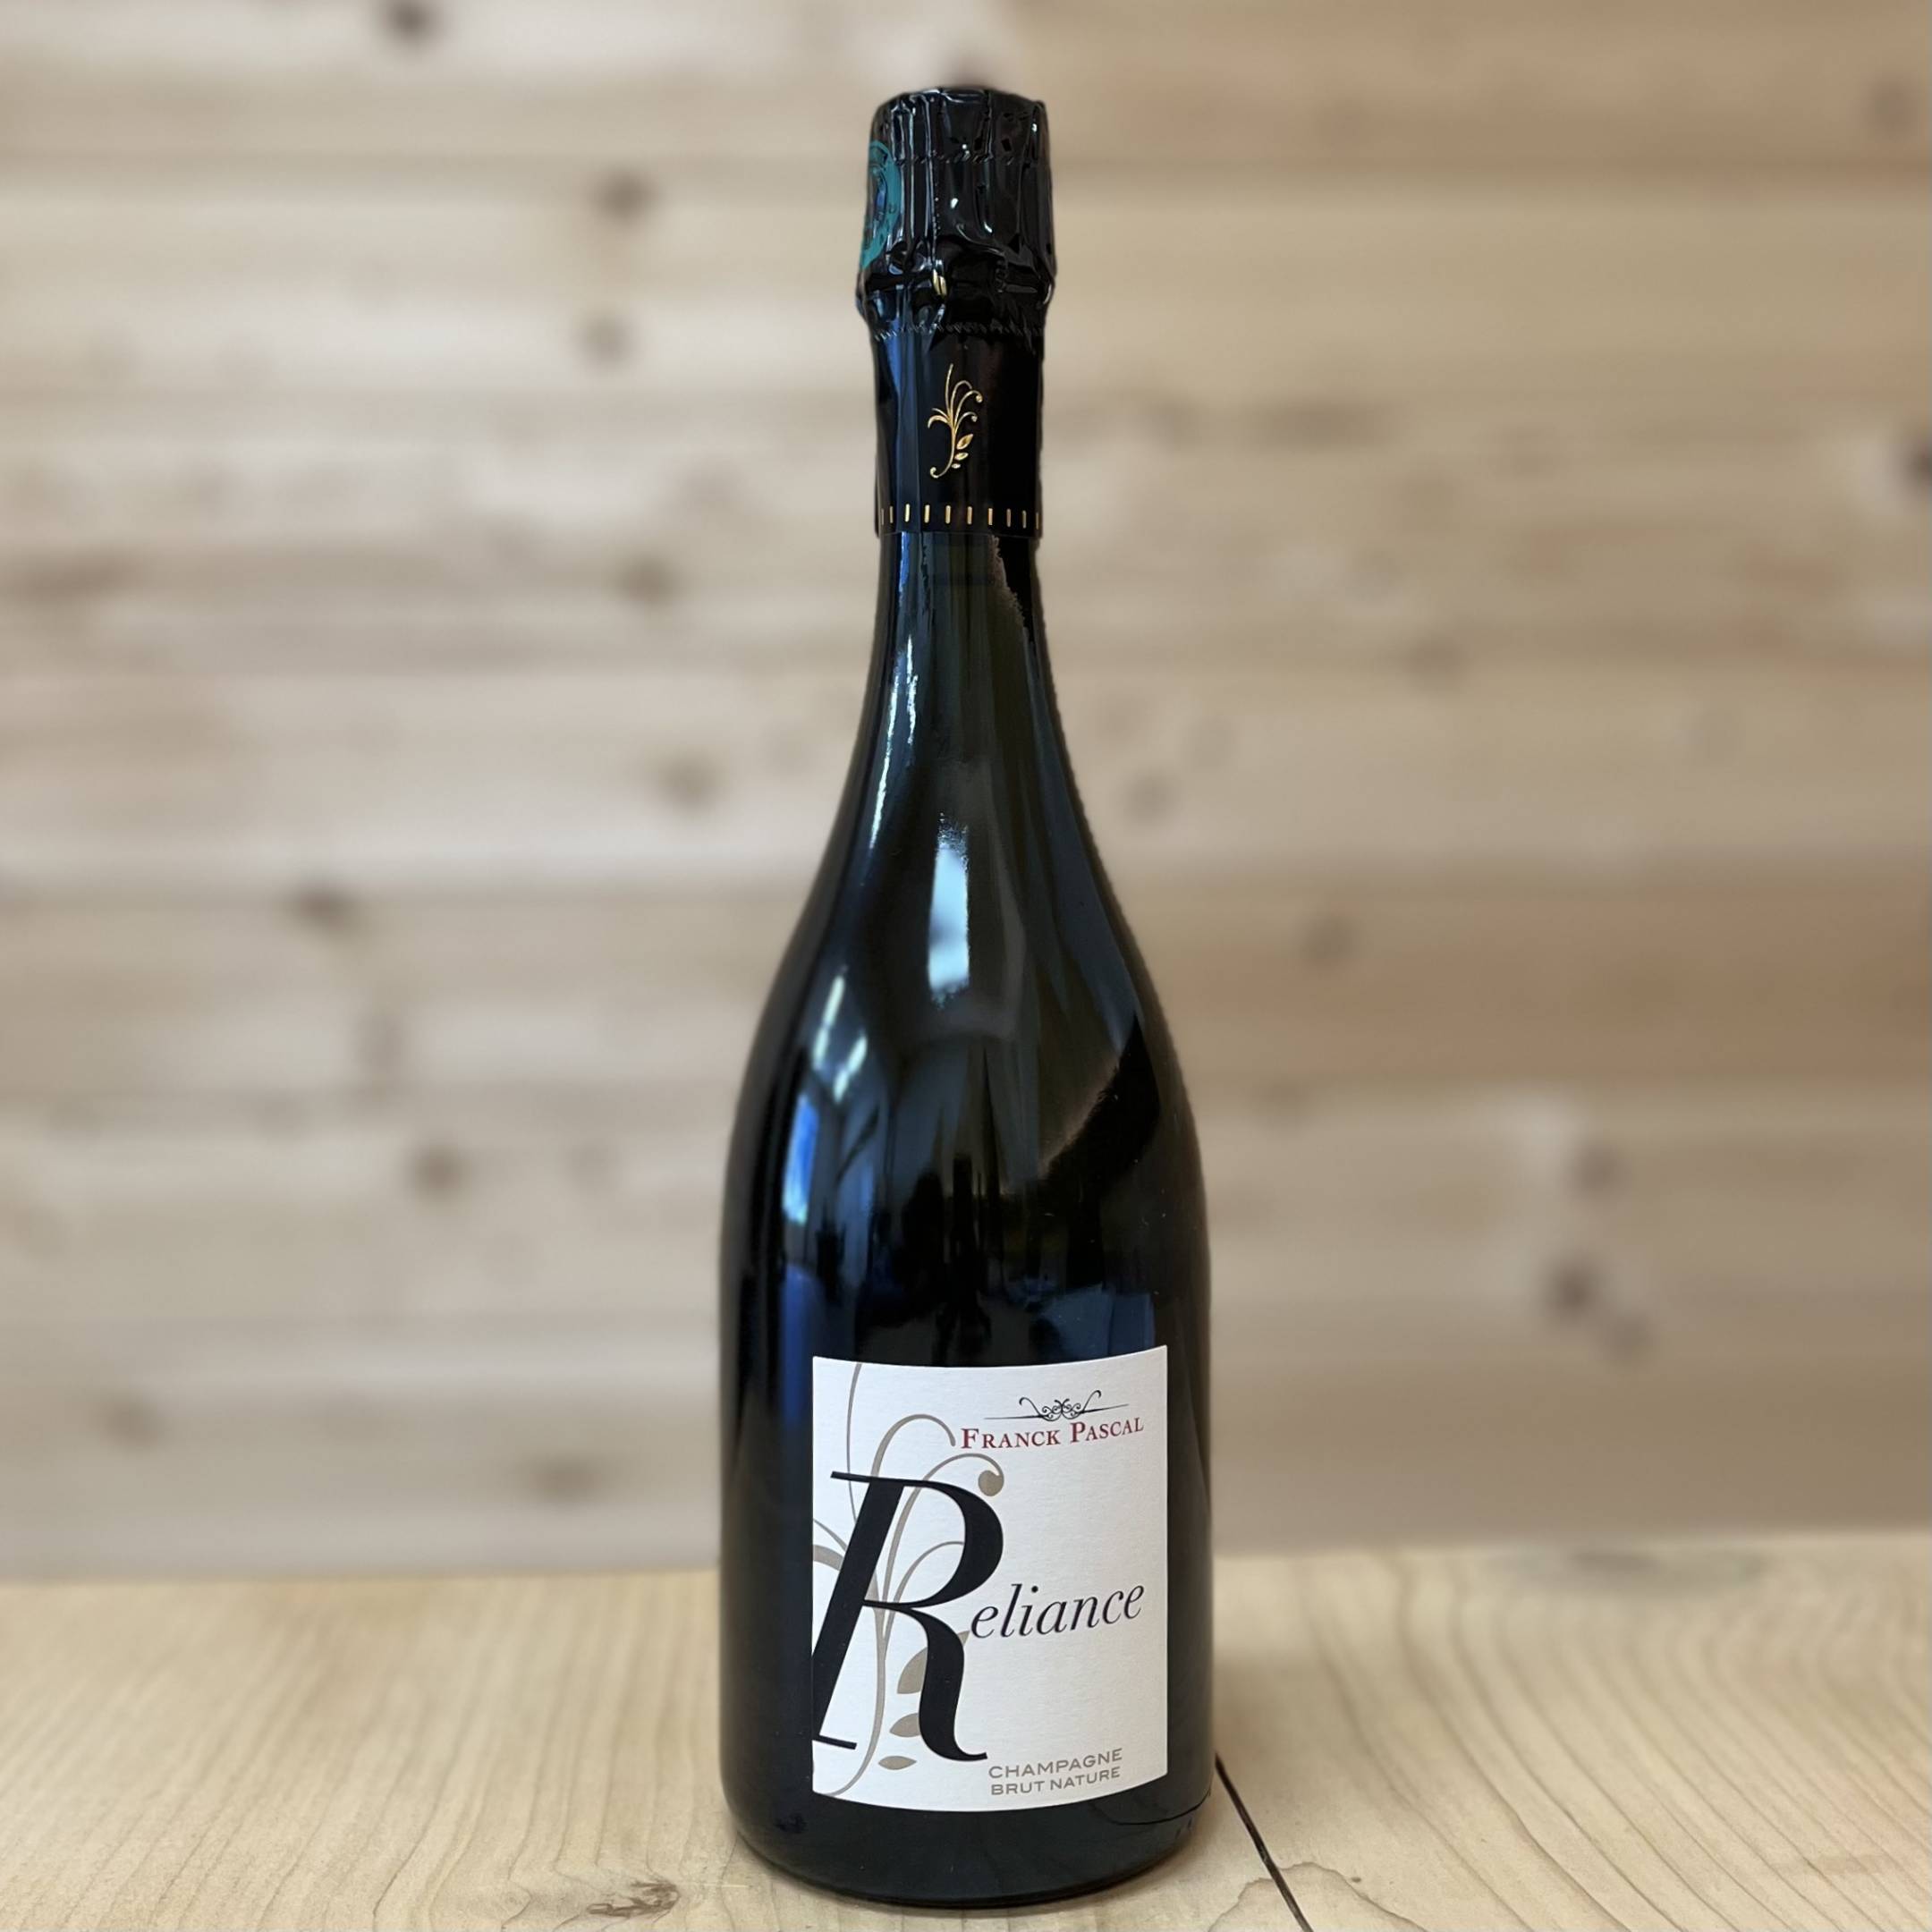 Franck Pascal Champagne Reliance Brut Nature